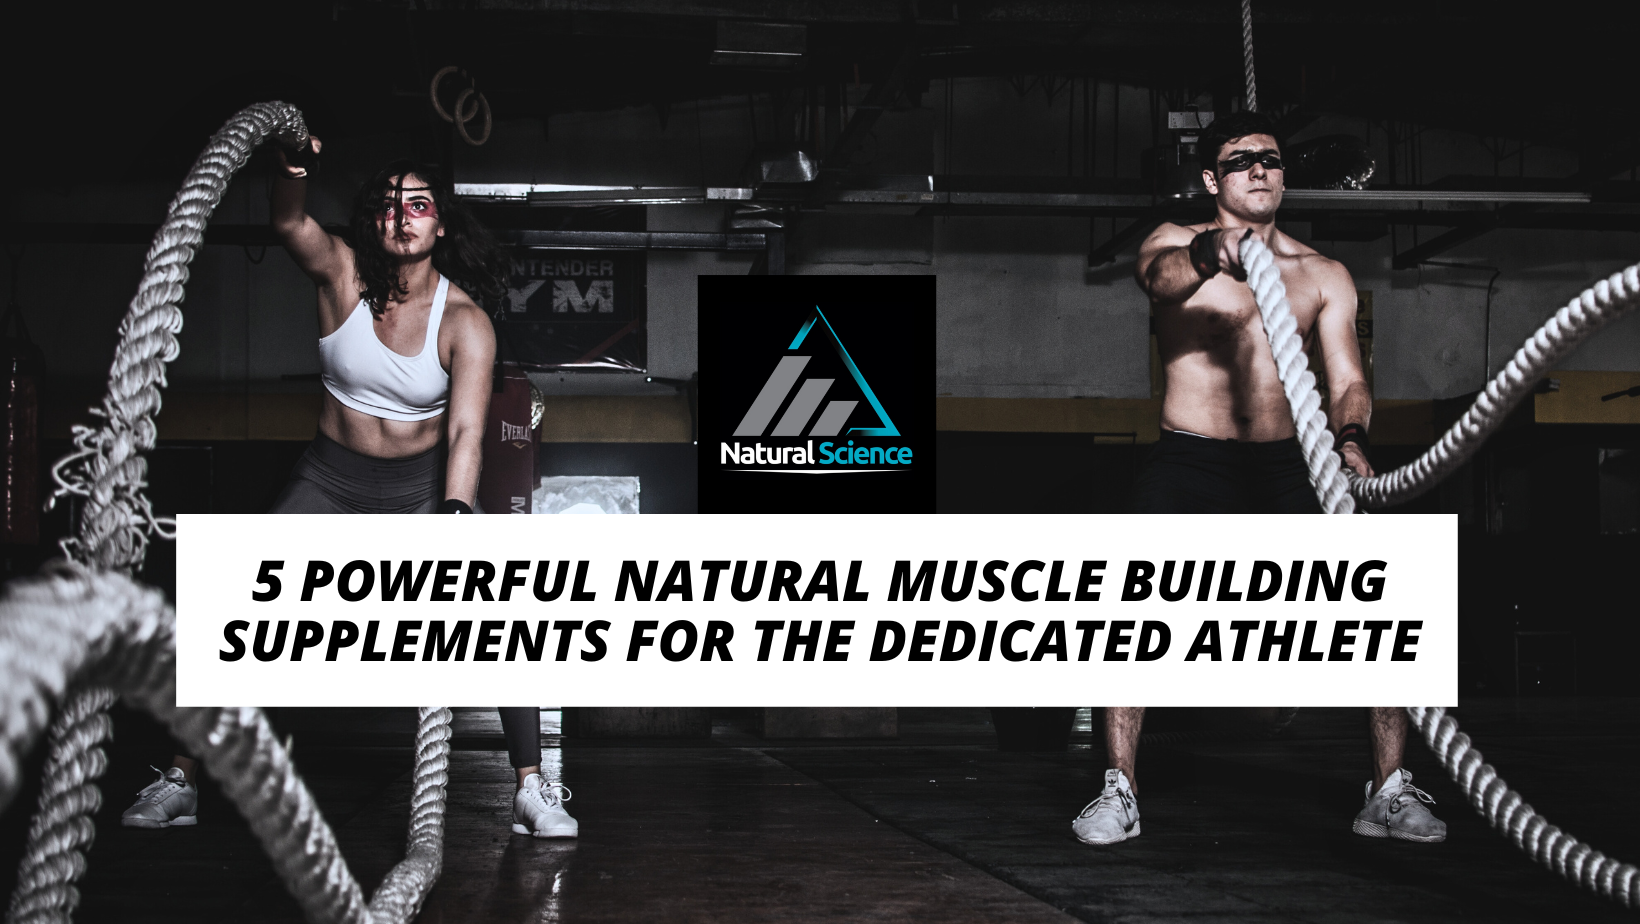 5 Powerful Natural Muscle Building Supplements for the Dedicated Athlete